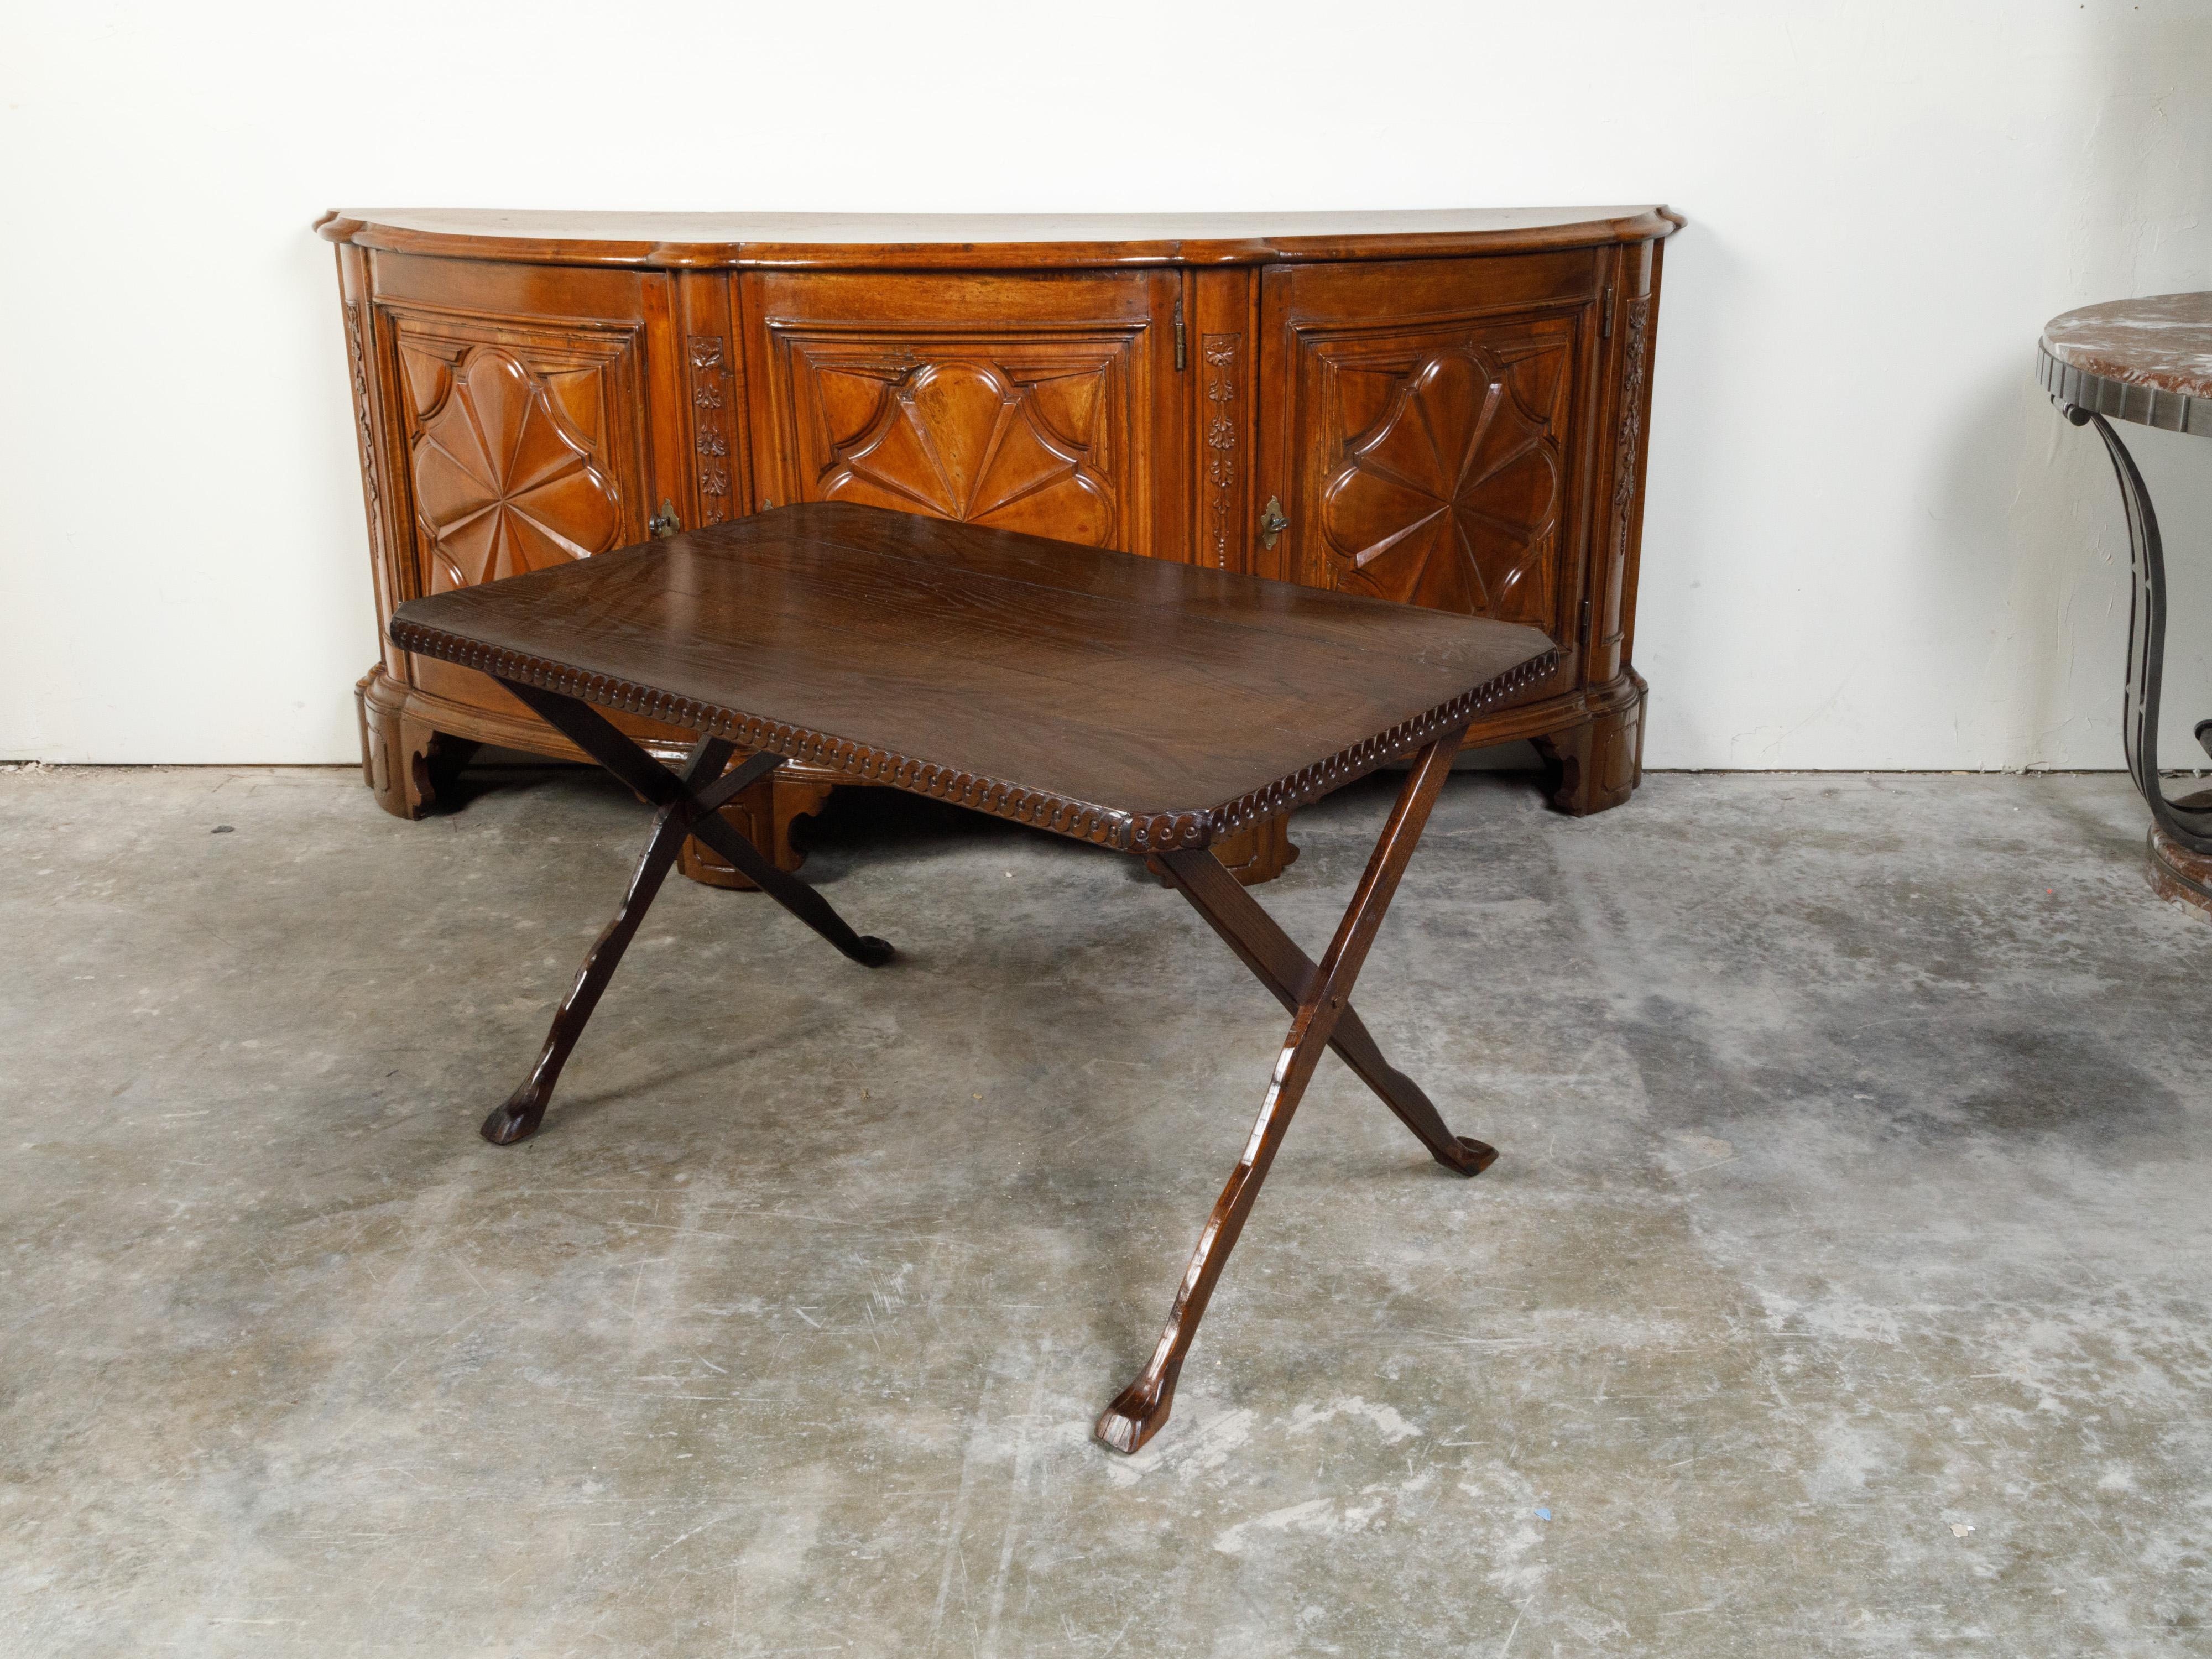 Italian 19th Century Oak Side Table with Carved Guilloche Frieze and X-Form Legs For Sale 1